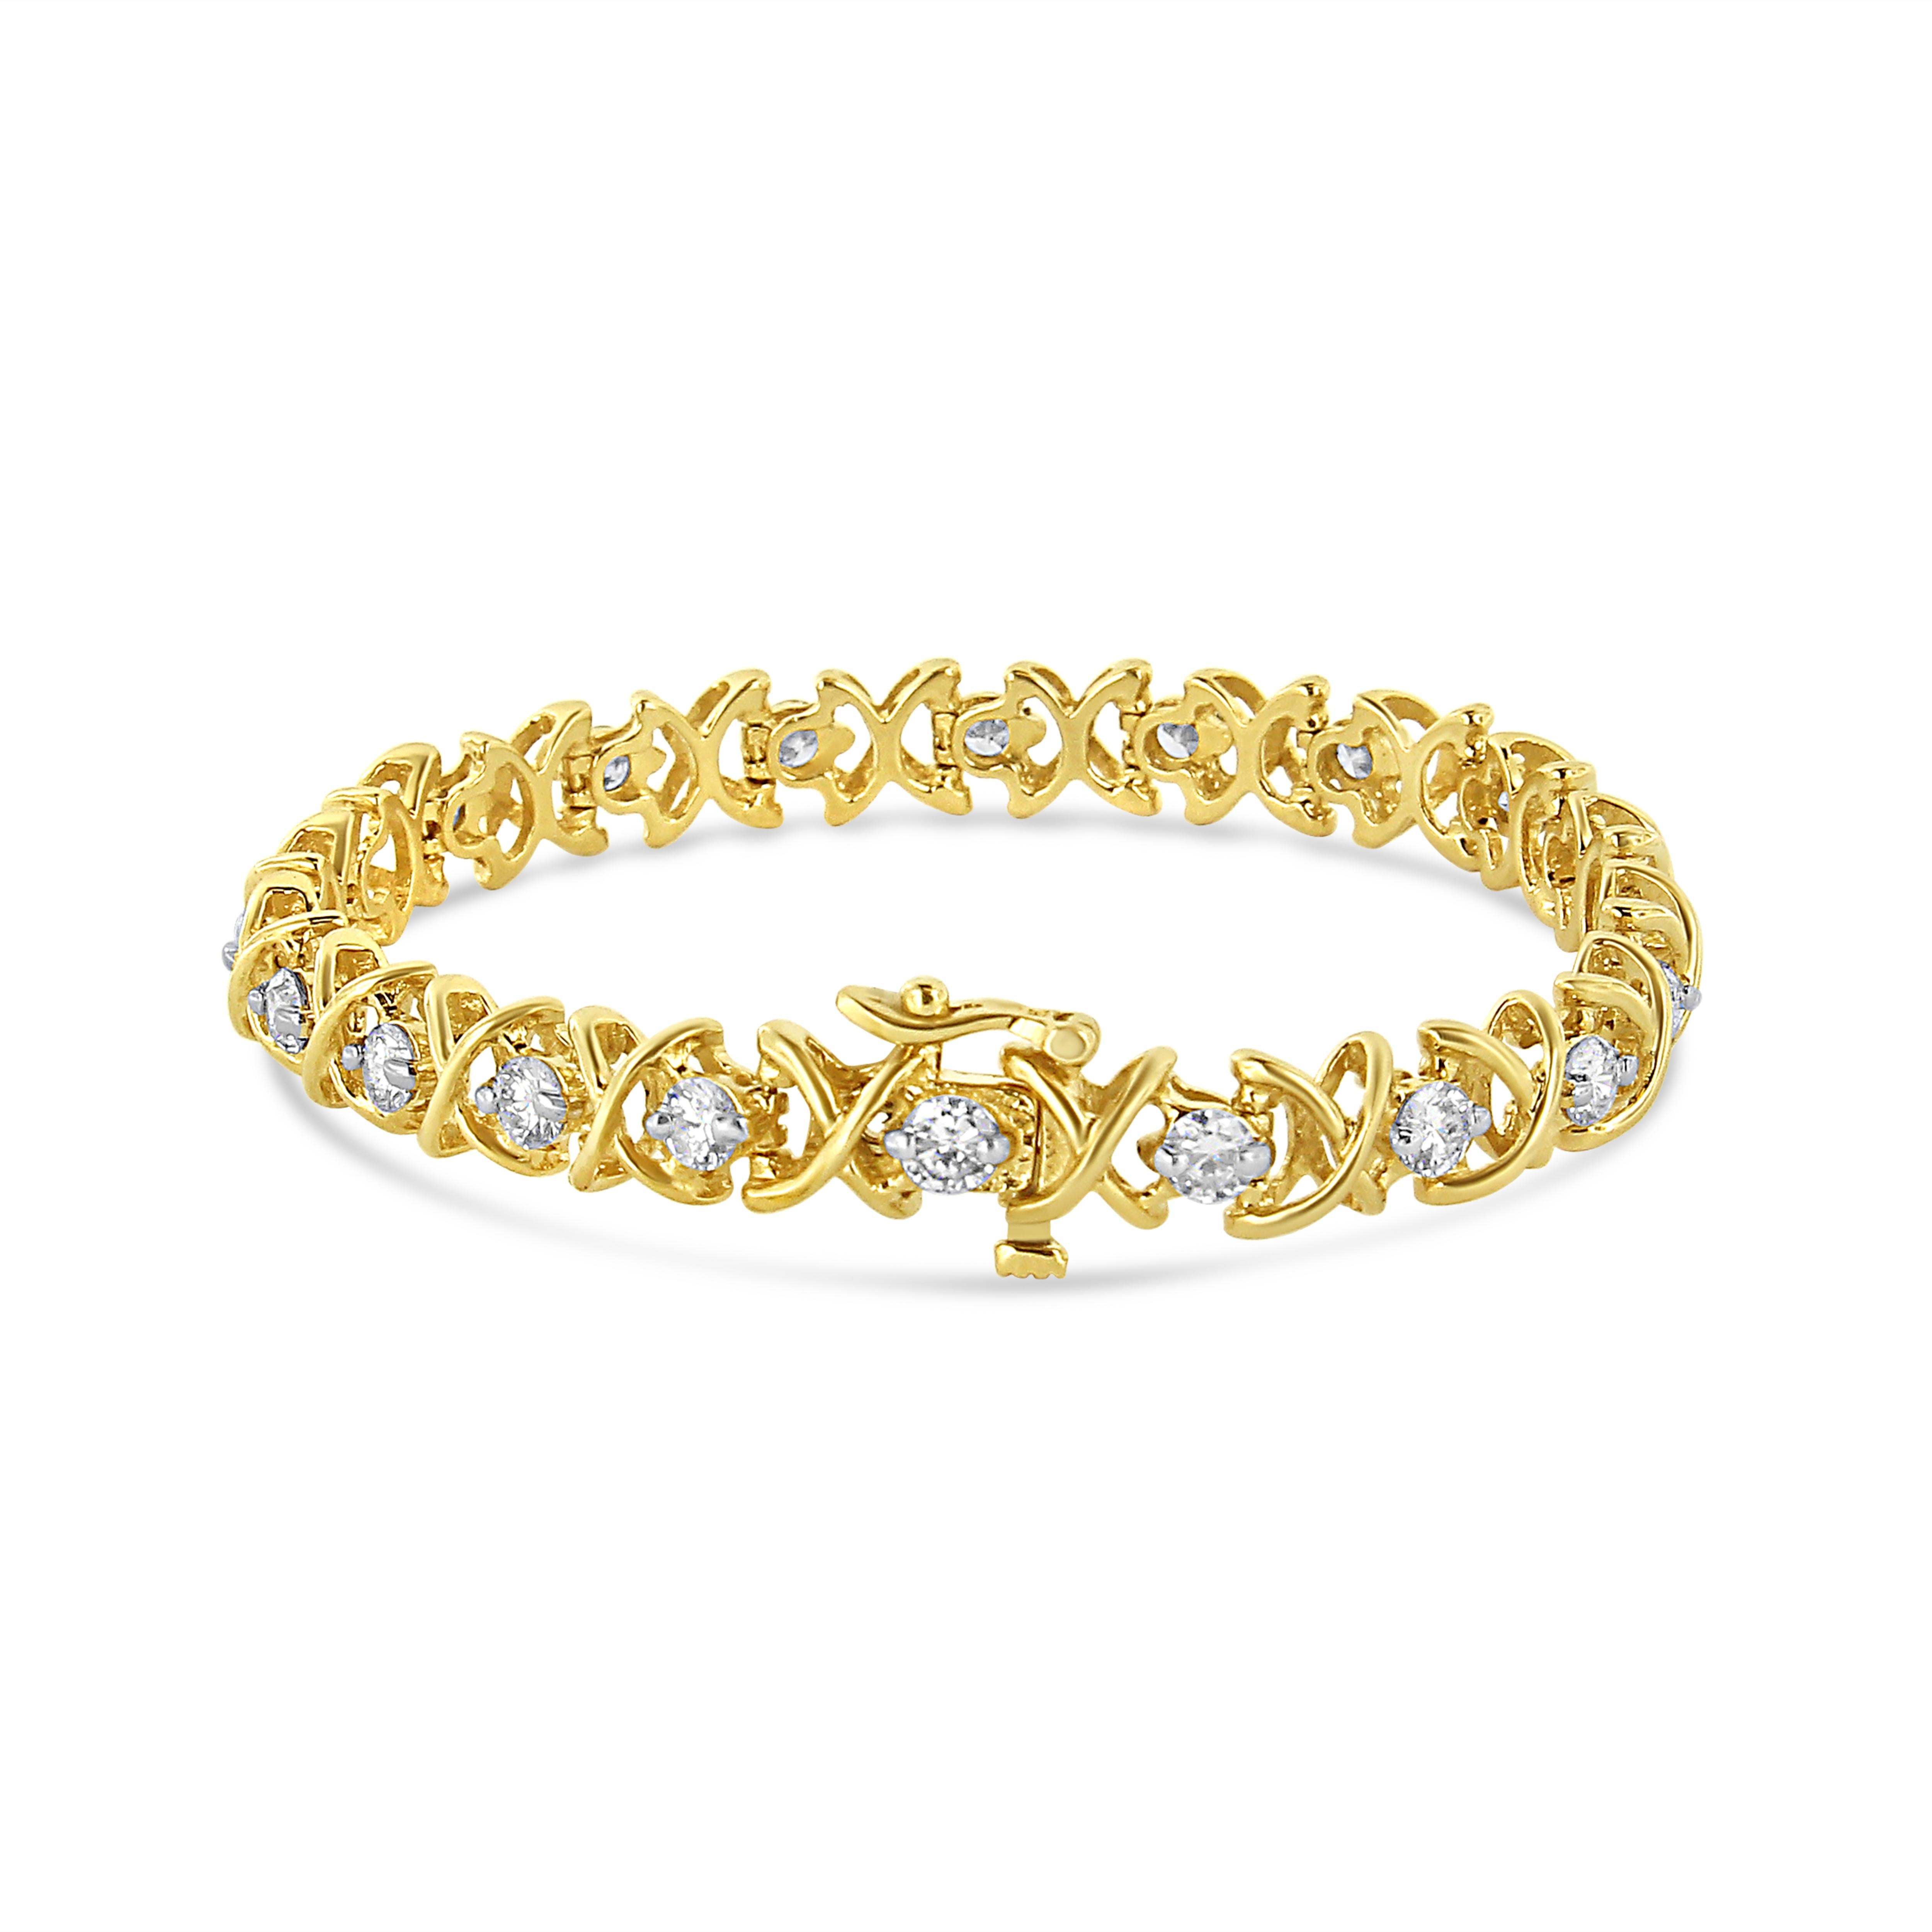 Adorn yourself with this unique 14k yellow gold link bracelet. Boasting an impressive 4 cttw, this bracelet is glamour embodied. Gold 